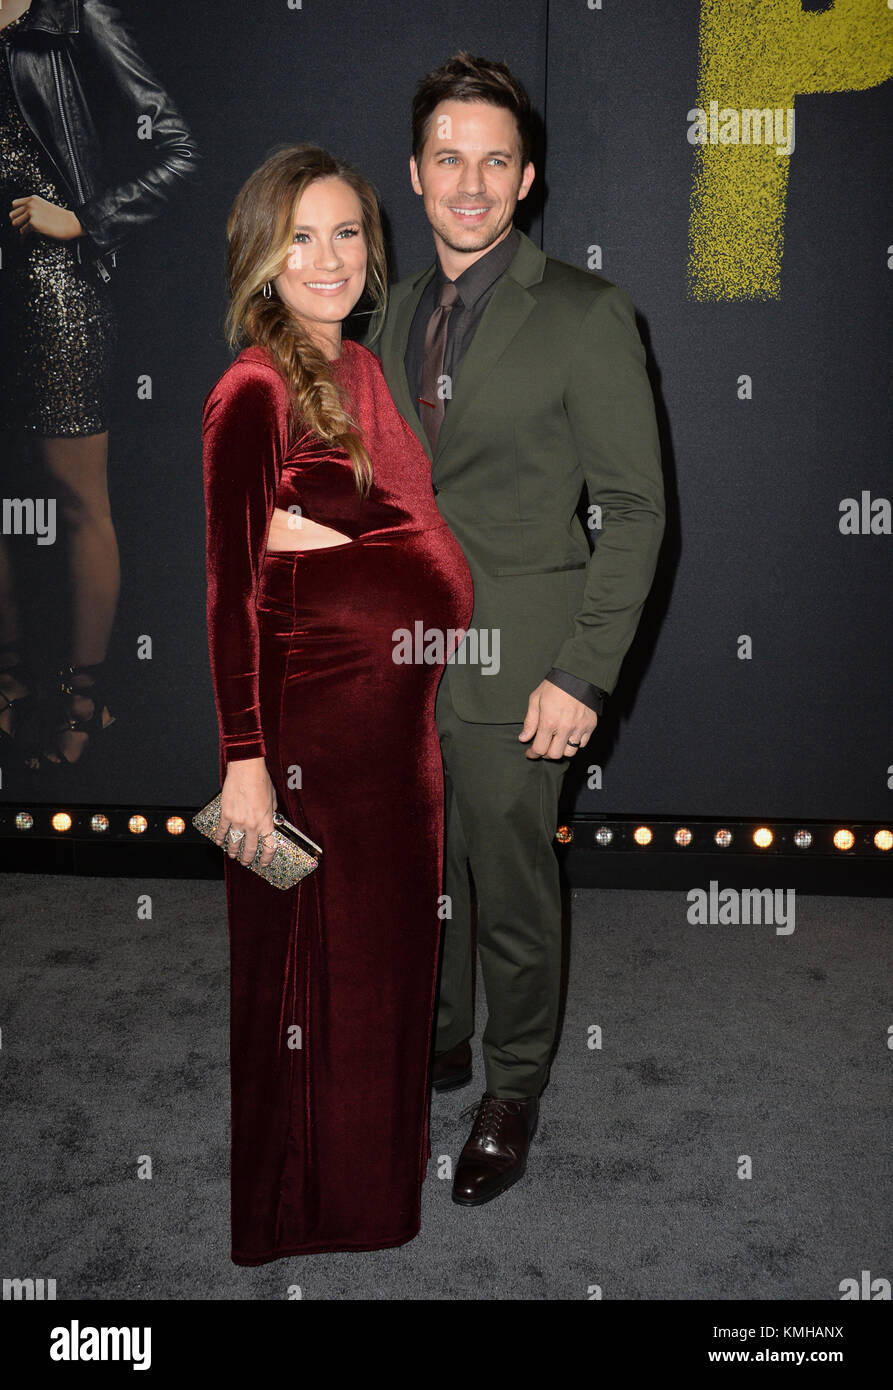 LOS ANGELES, CA. December 12, 2017: Matt Lanter & Angela Stacy at the world  premiere of "Pitch Perfect 3" at the TCL Chinese Theatre, Hollywood  Picture: Sarah Stewart Stock Photo - Alamy